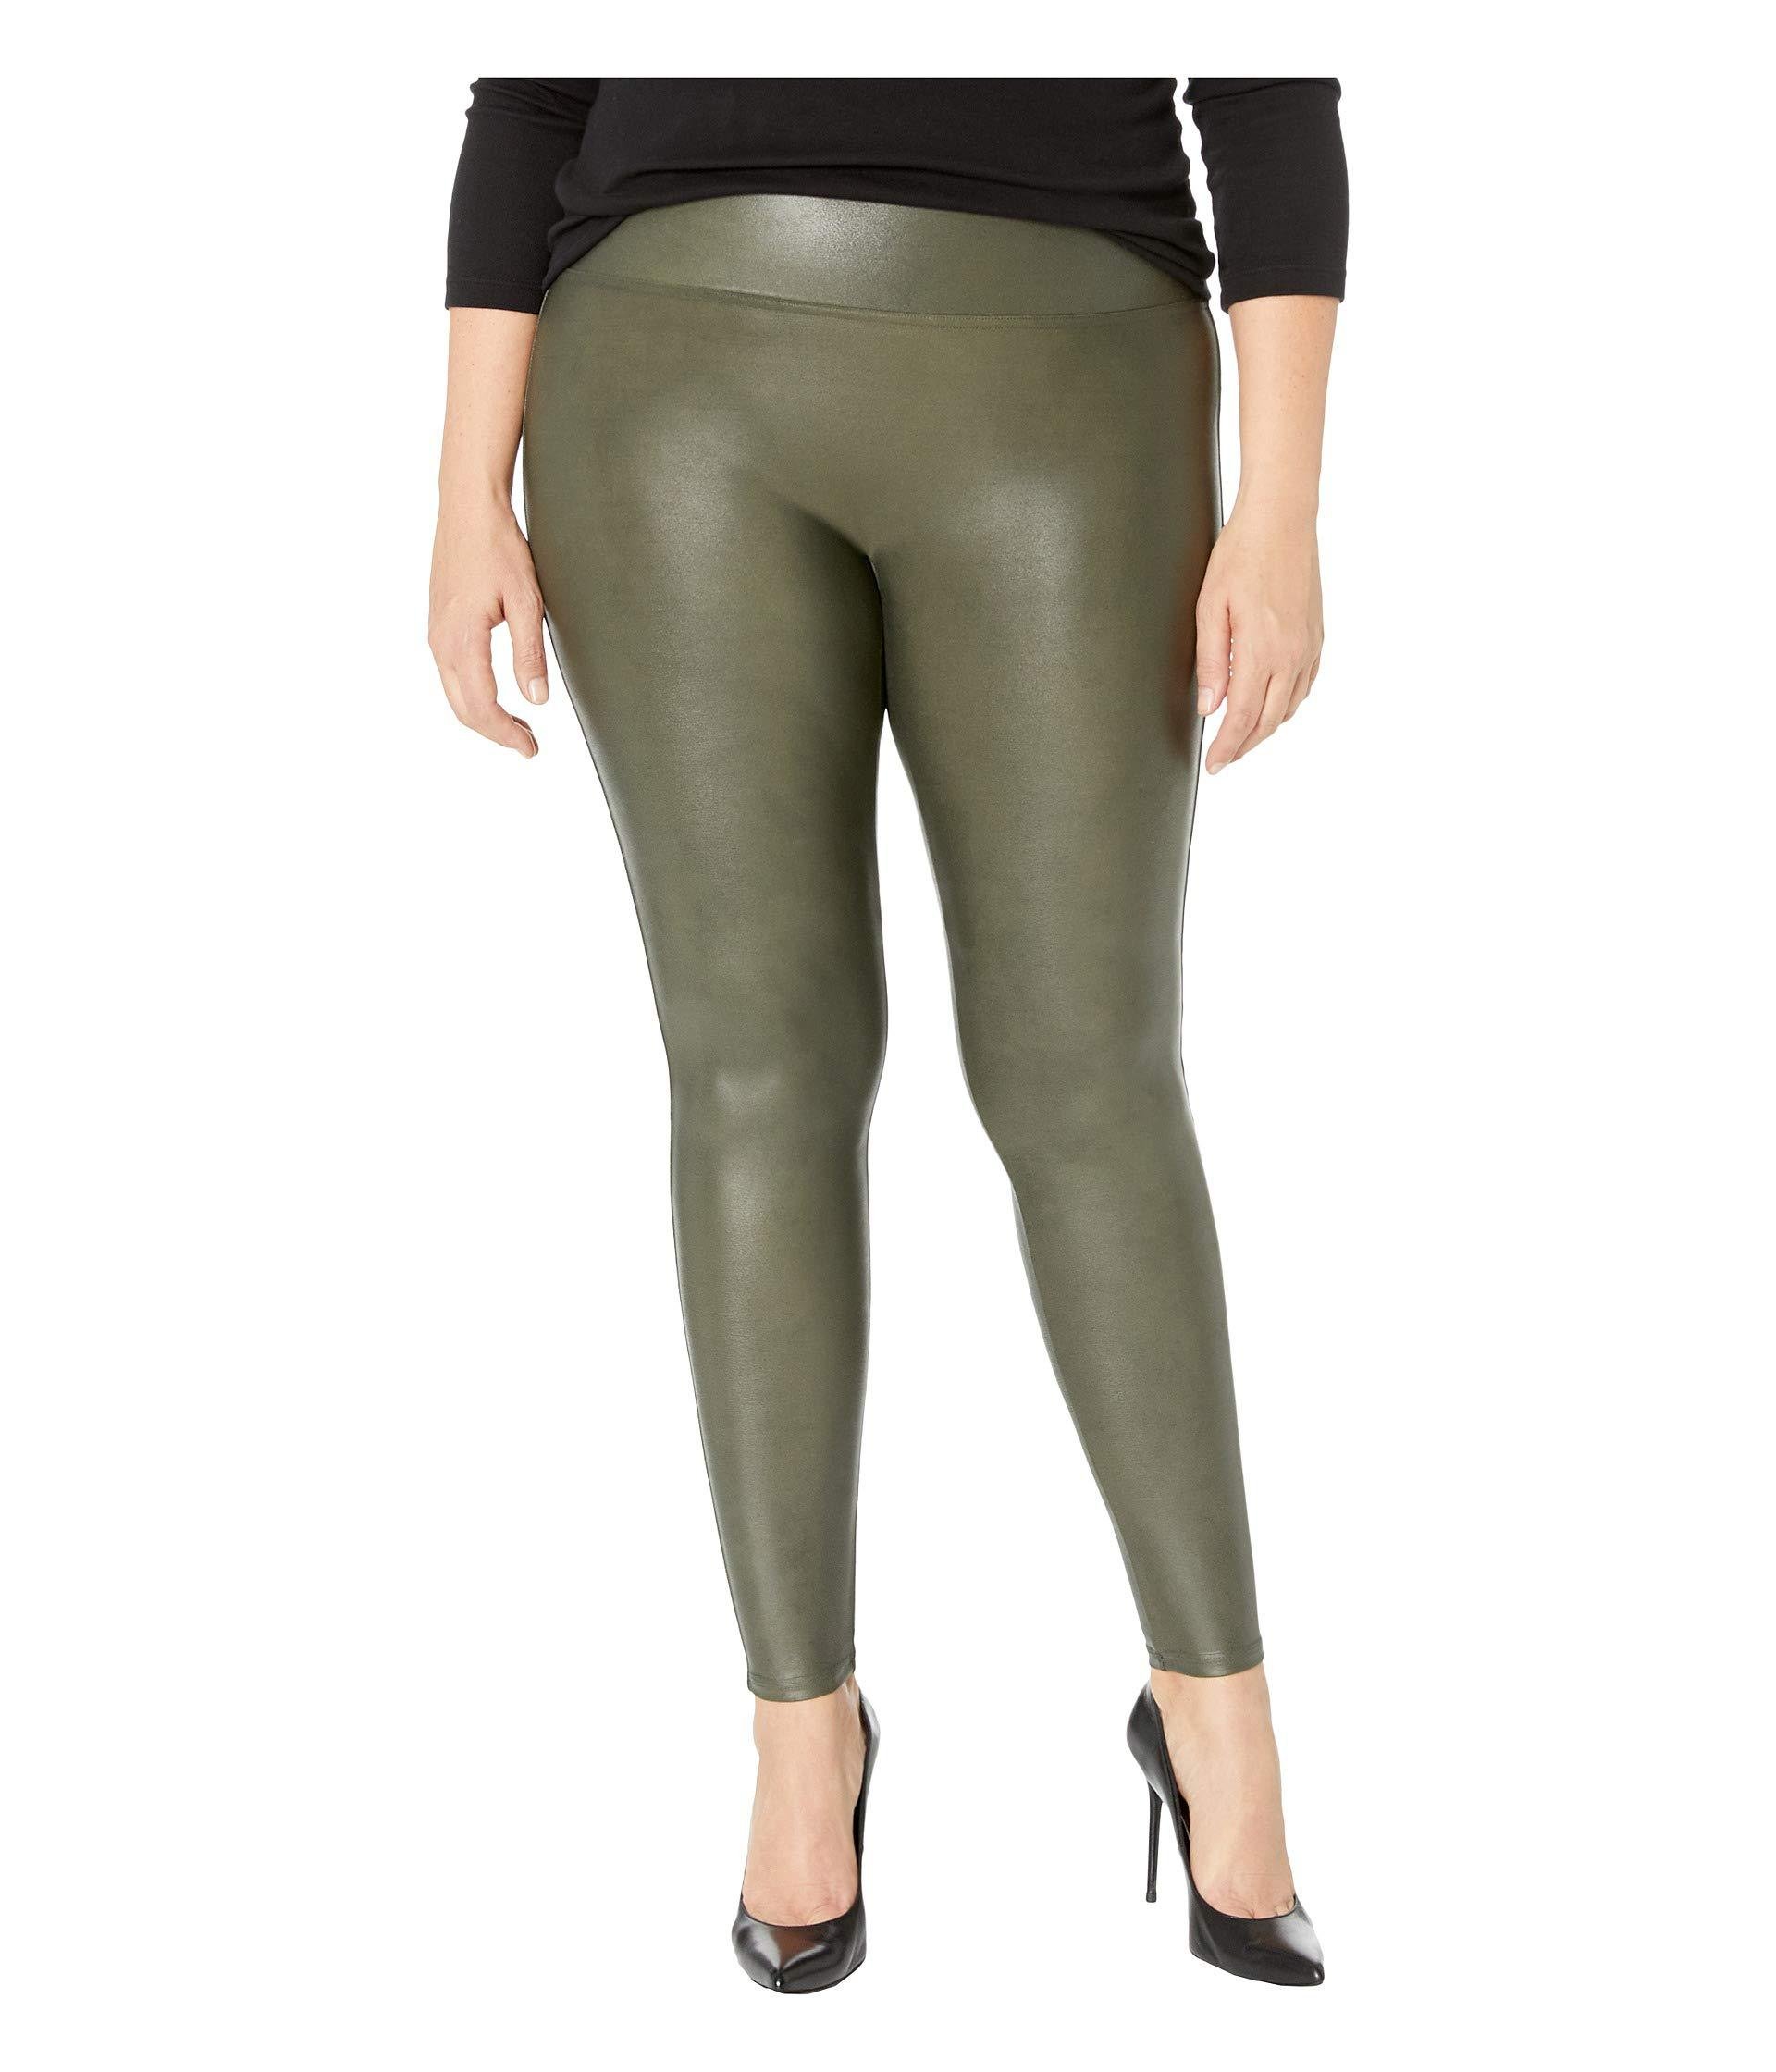 Spanx Women's Faux Leather Leggings in Black Size M Style No.2437